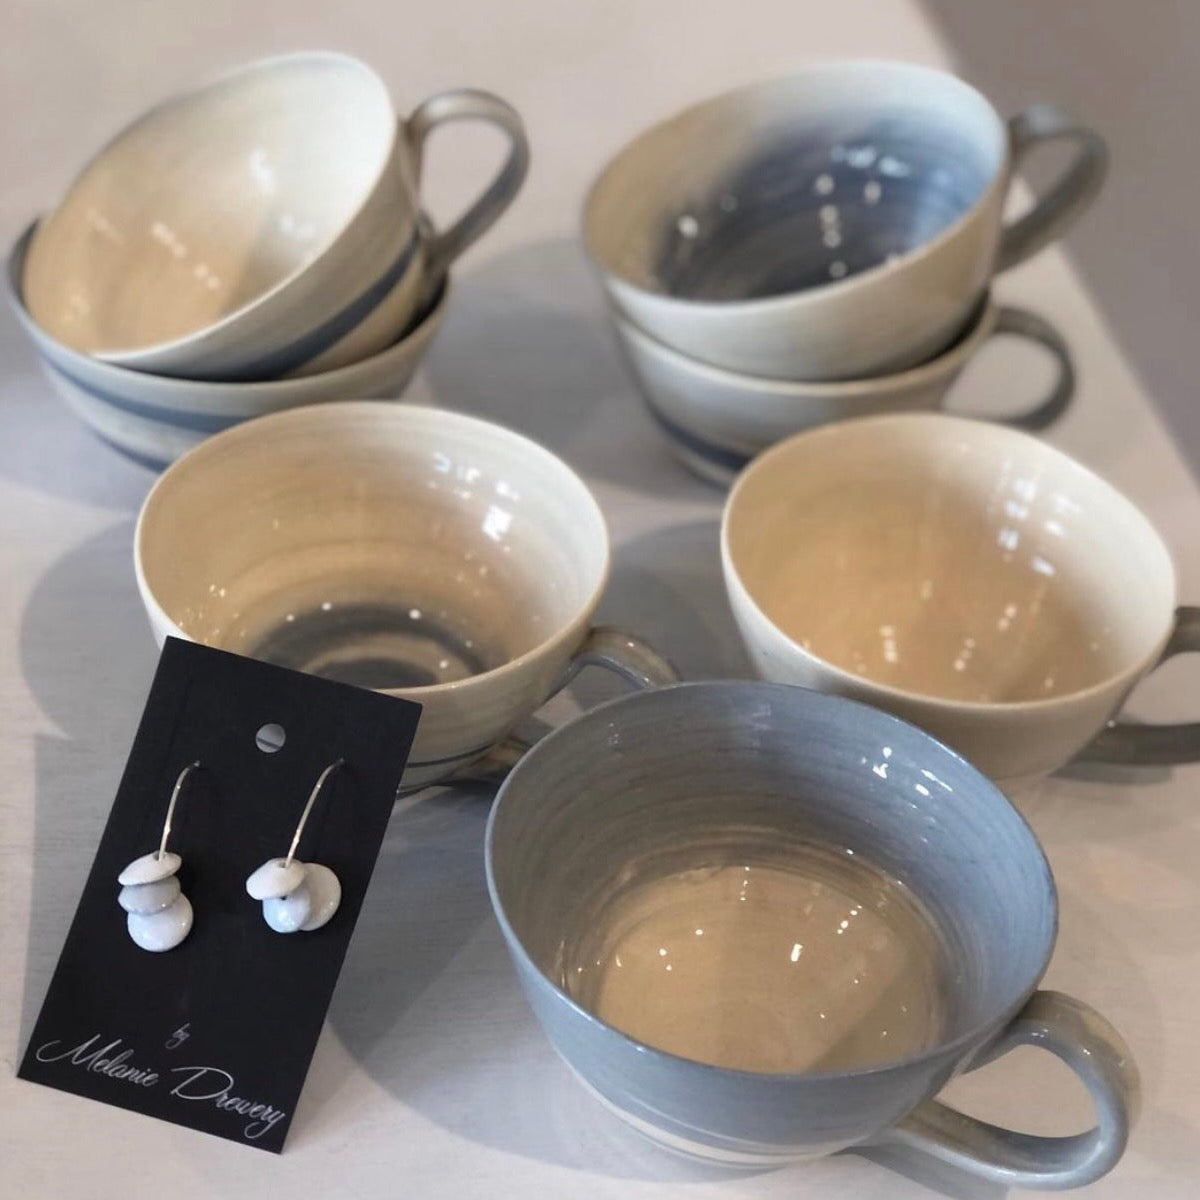 Grey teacups with matching earrings